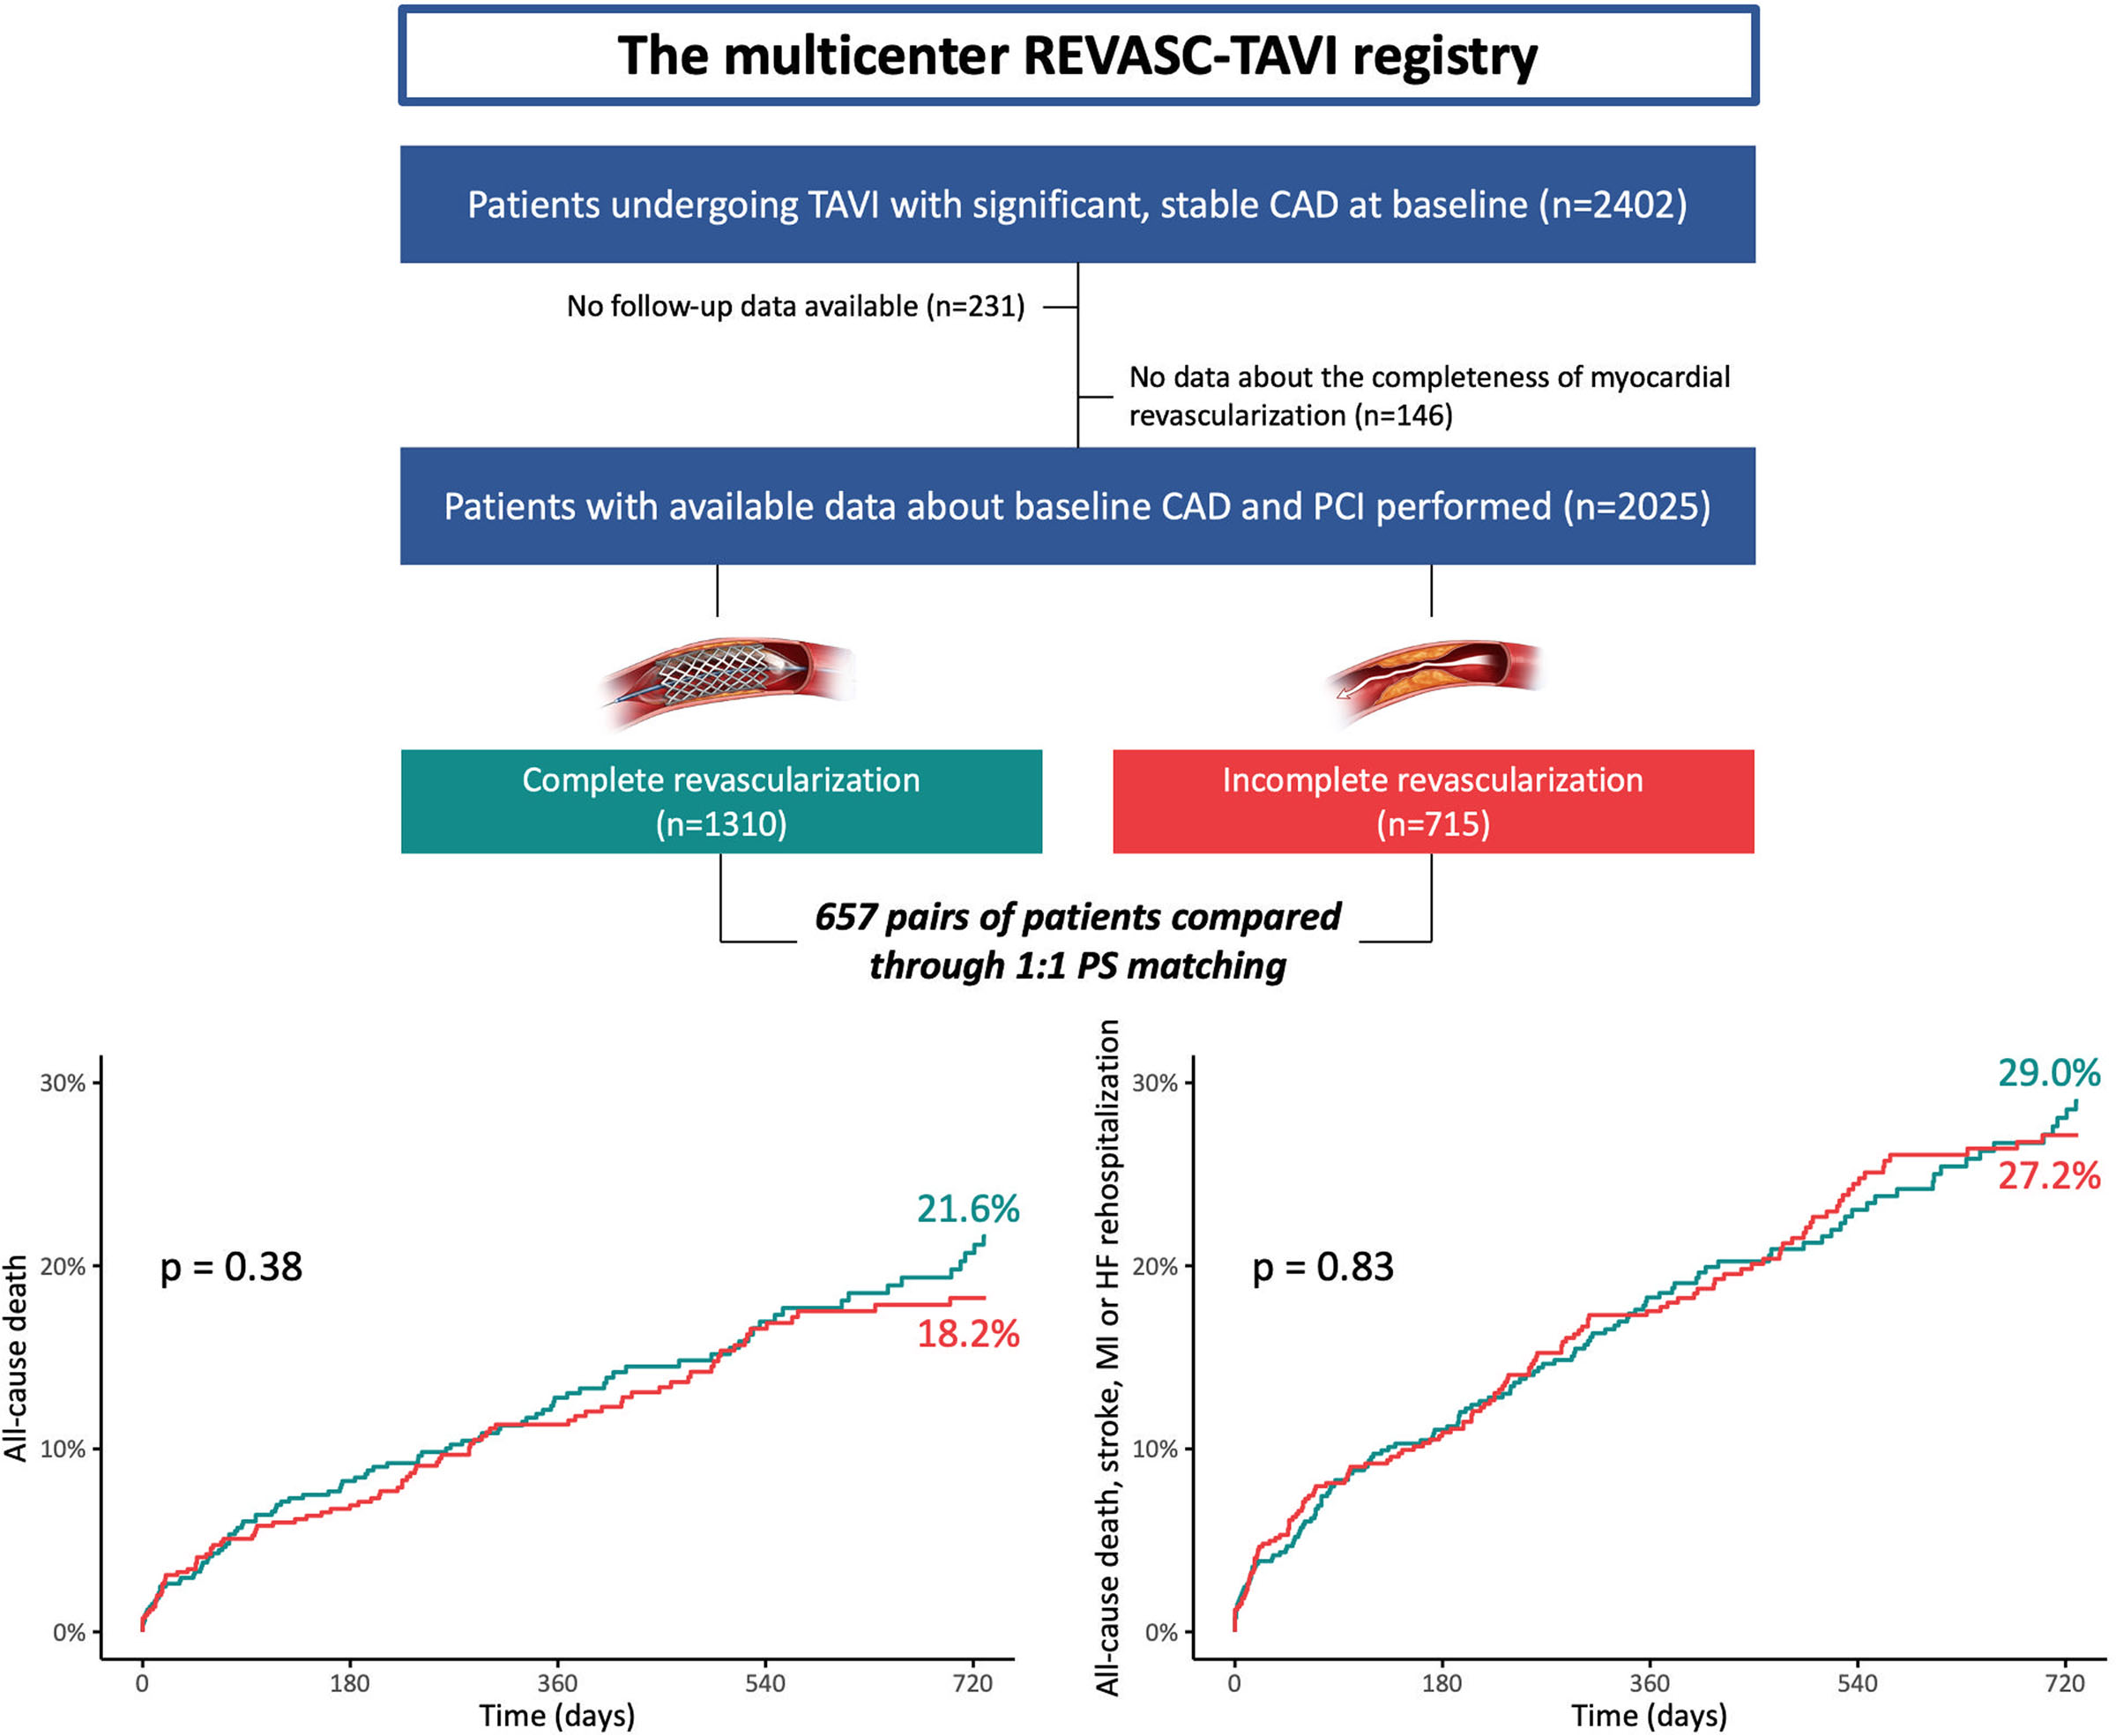 Management of Myocardial Revascularization in Patients With Stable Coronary Artery Disease Undergoing Transcatheter Aortic Valve Implantation